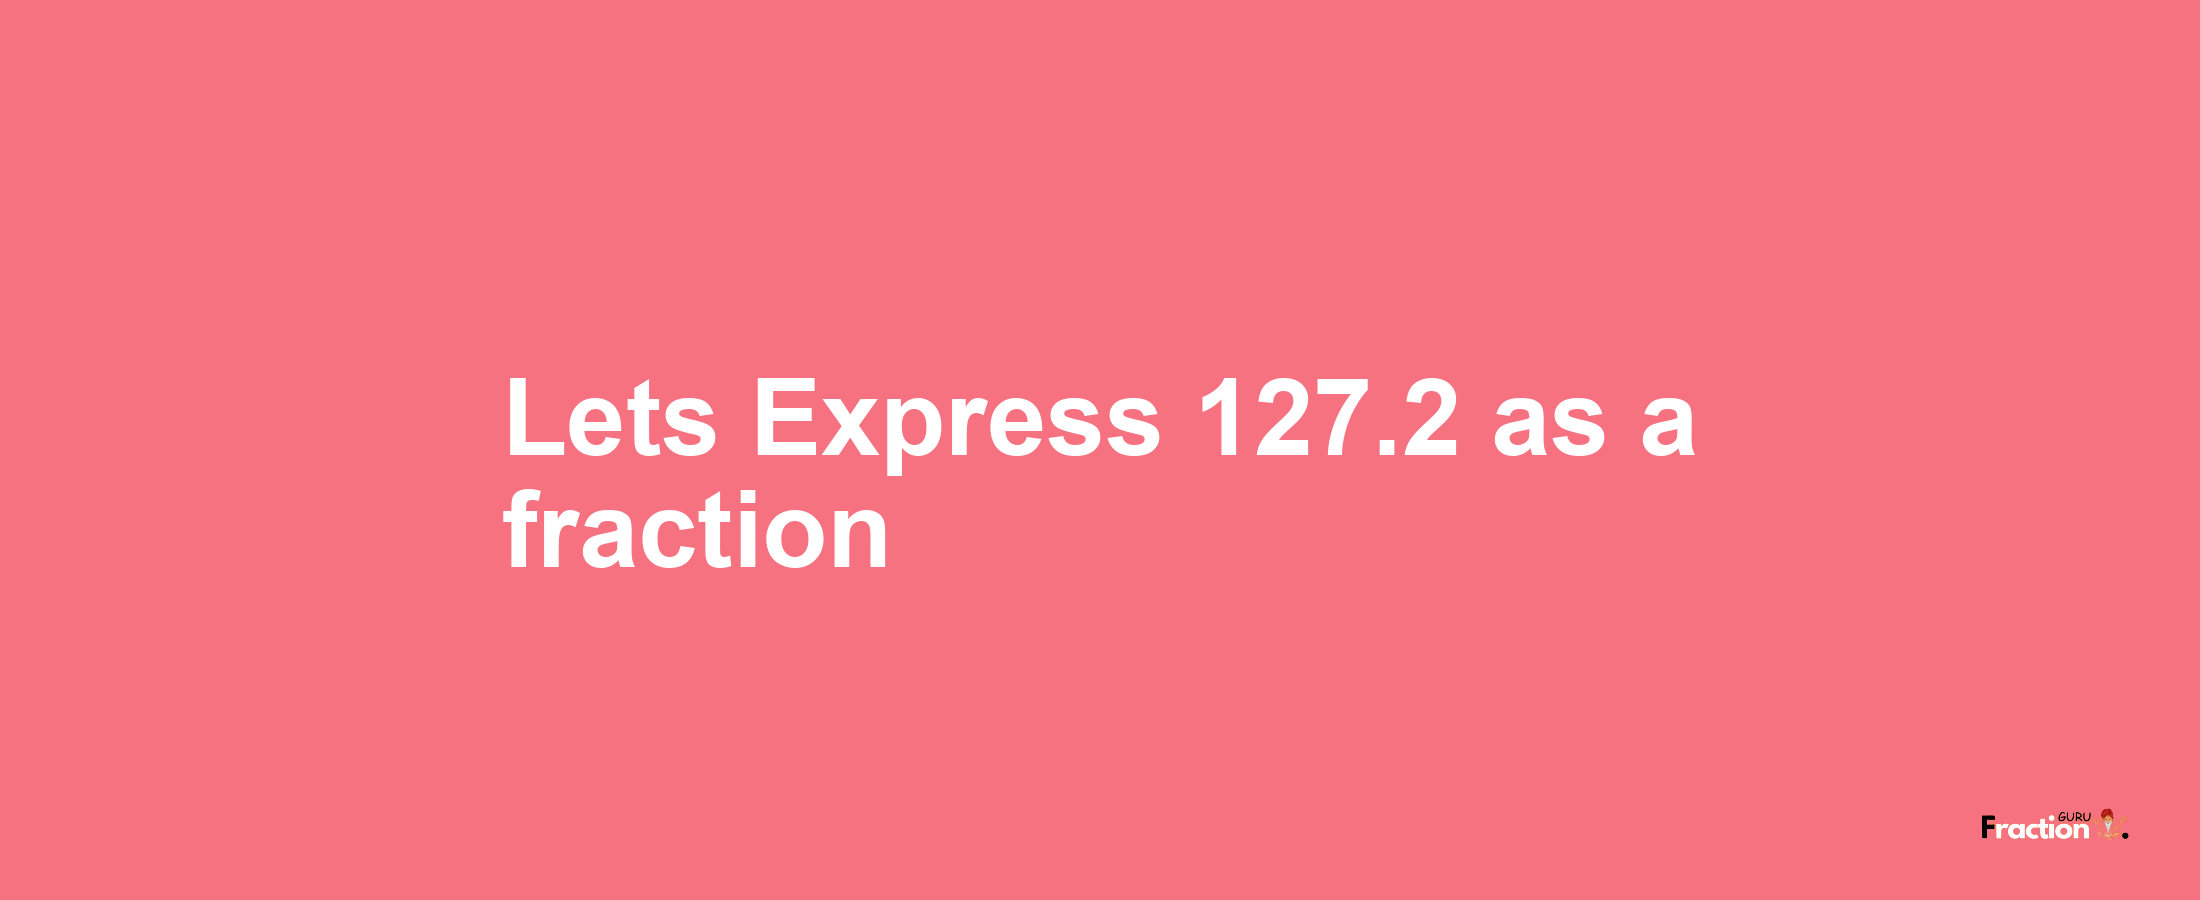 Lets Express 127.2 as afraction